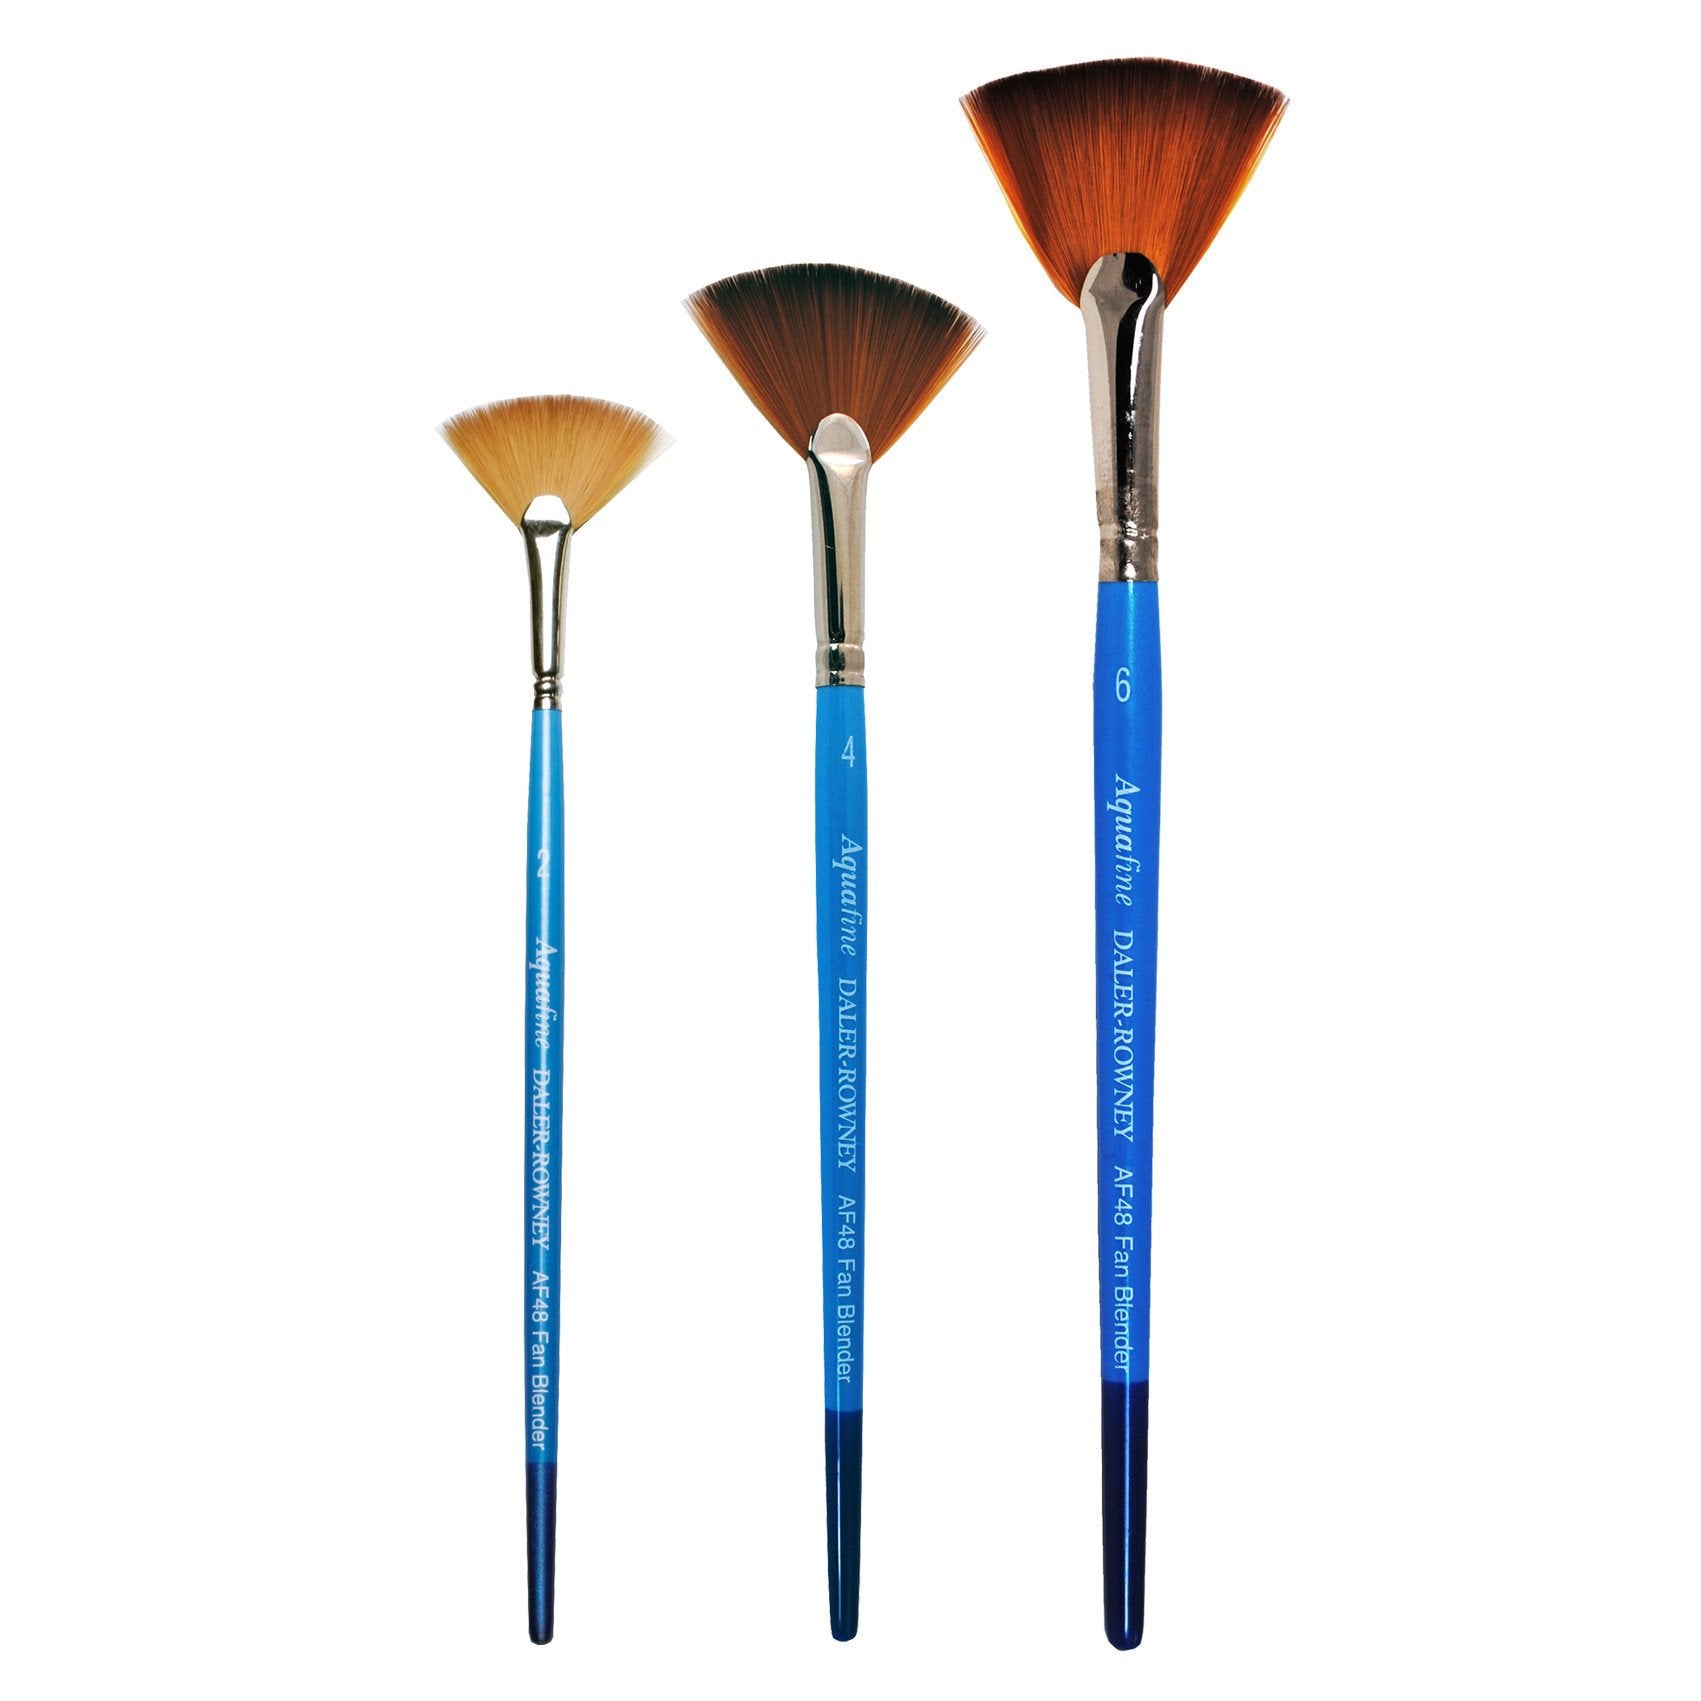 Daler-Rowney’s Aquafine watercolour brushes are made using a formulation of thick and thin filaments, tapered to a point, as well as different lengths. This process imitates that of natural sable hair but because they are synthetic they offer longer life and affordability. The fan-shaped head is used for subtle blending of colour on the surface and in dry brushwork, for distant trees and foreground foliage.